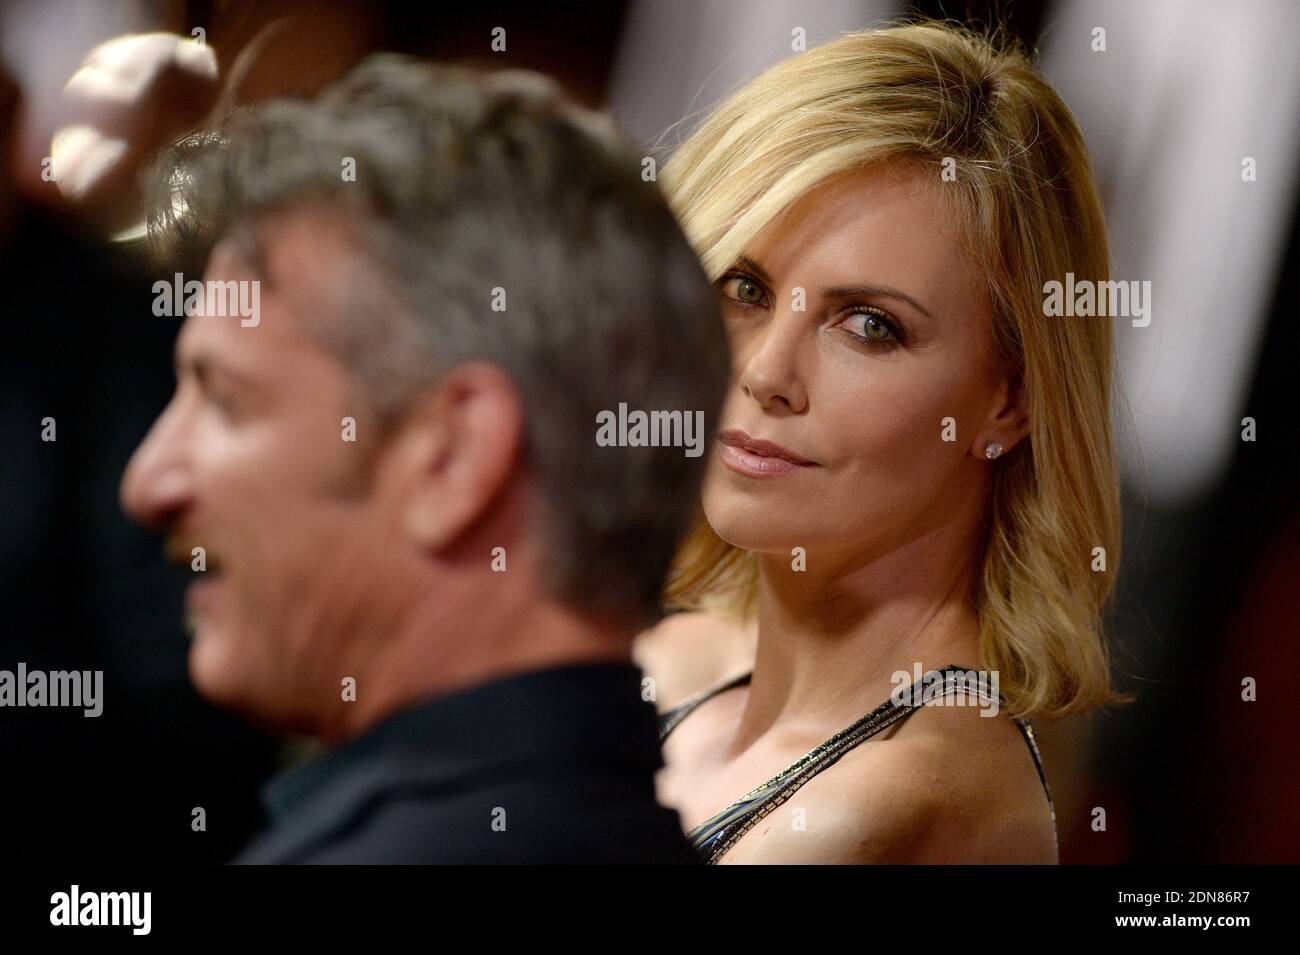 Sean Penn and Charlize Theron attend The Gunman premiere on March 12, 2015 in Los Angeles, CA, USA. Photo by Lionel Hahn/ABACAPRESS.COM Stock Photo